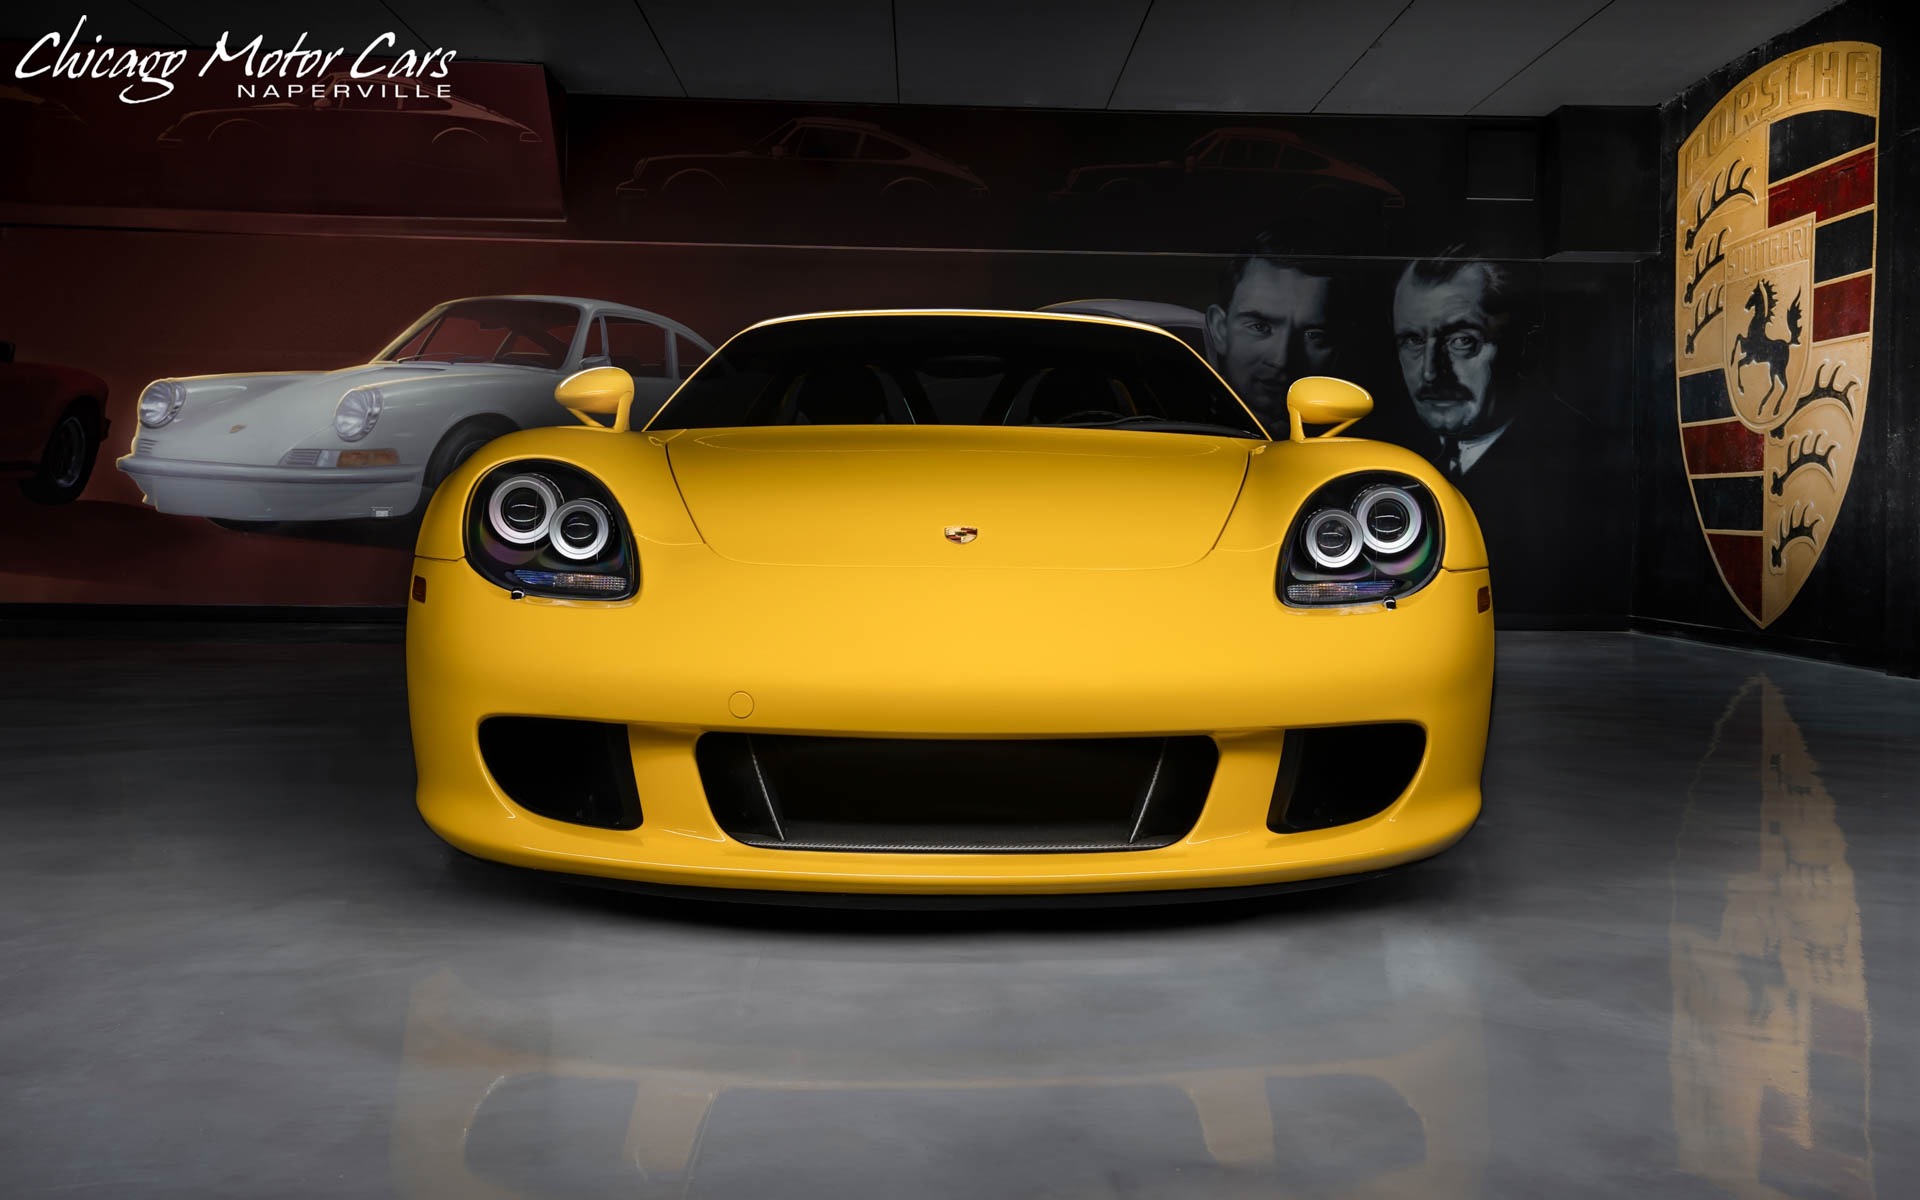 Used 2005 Porsche Carrera GT Coupe Fayence Yellow RARE Collector Quality!  Serviced! Perfect! For Sale (Special Pricing) | Chicago Motor Cars Stock  #17959